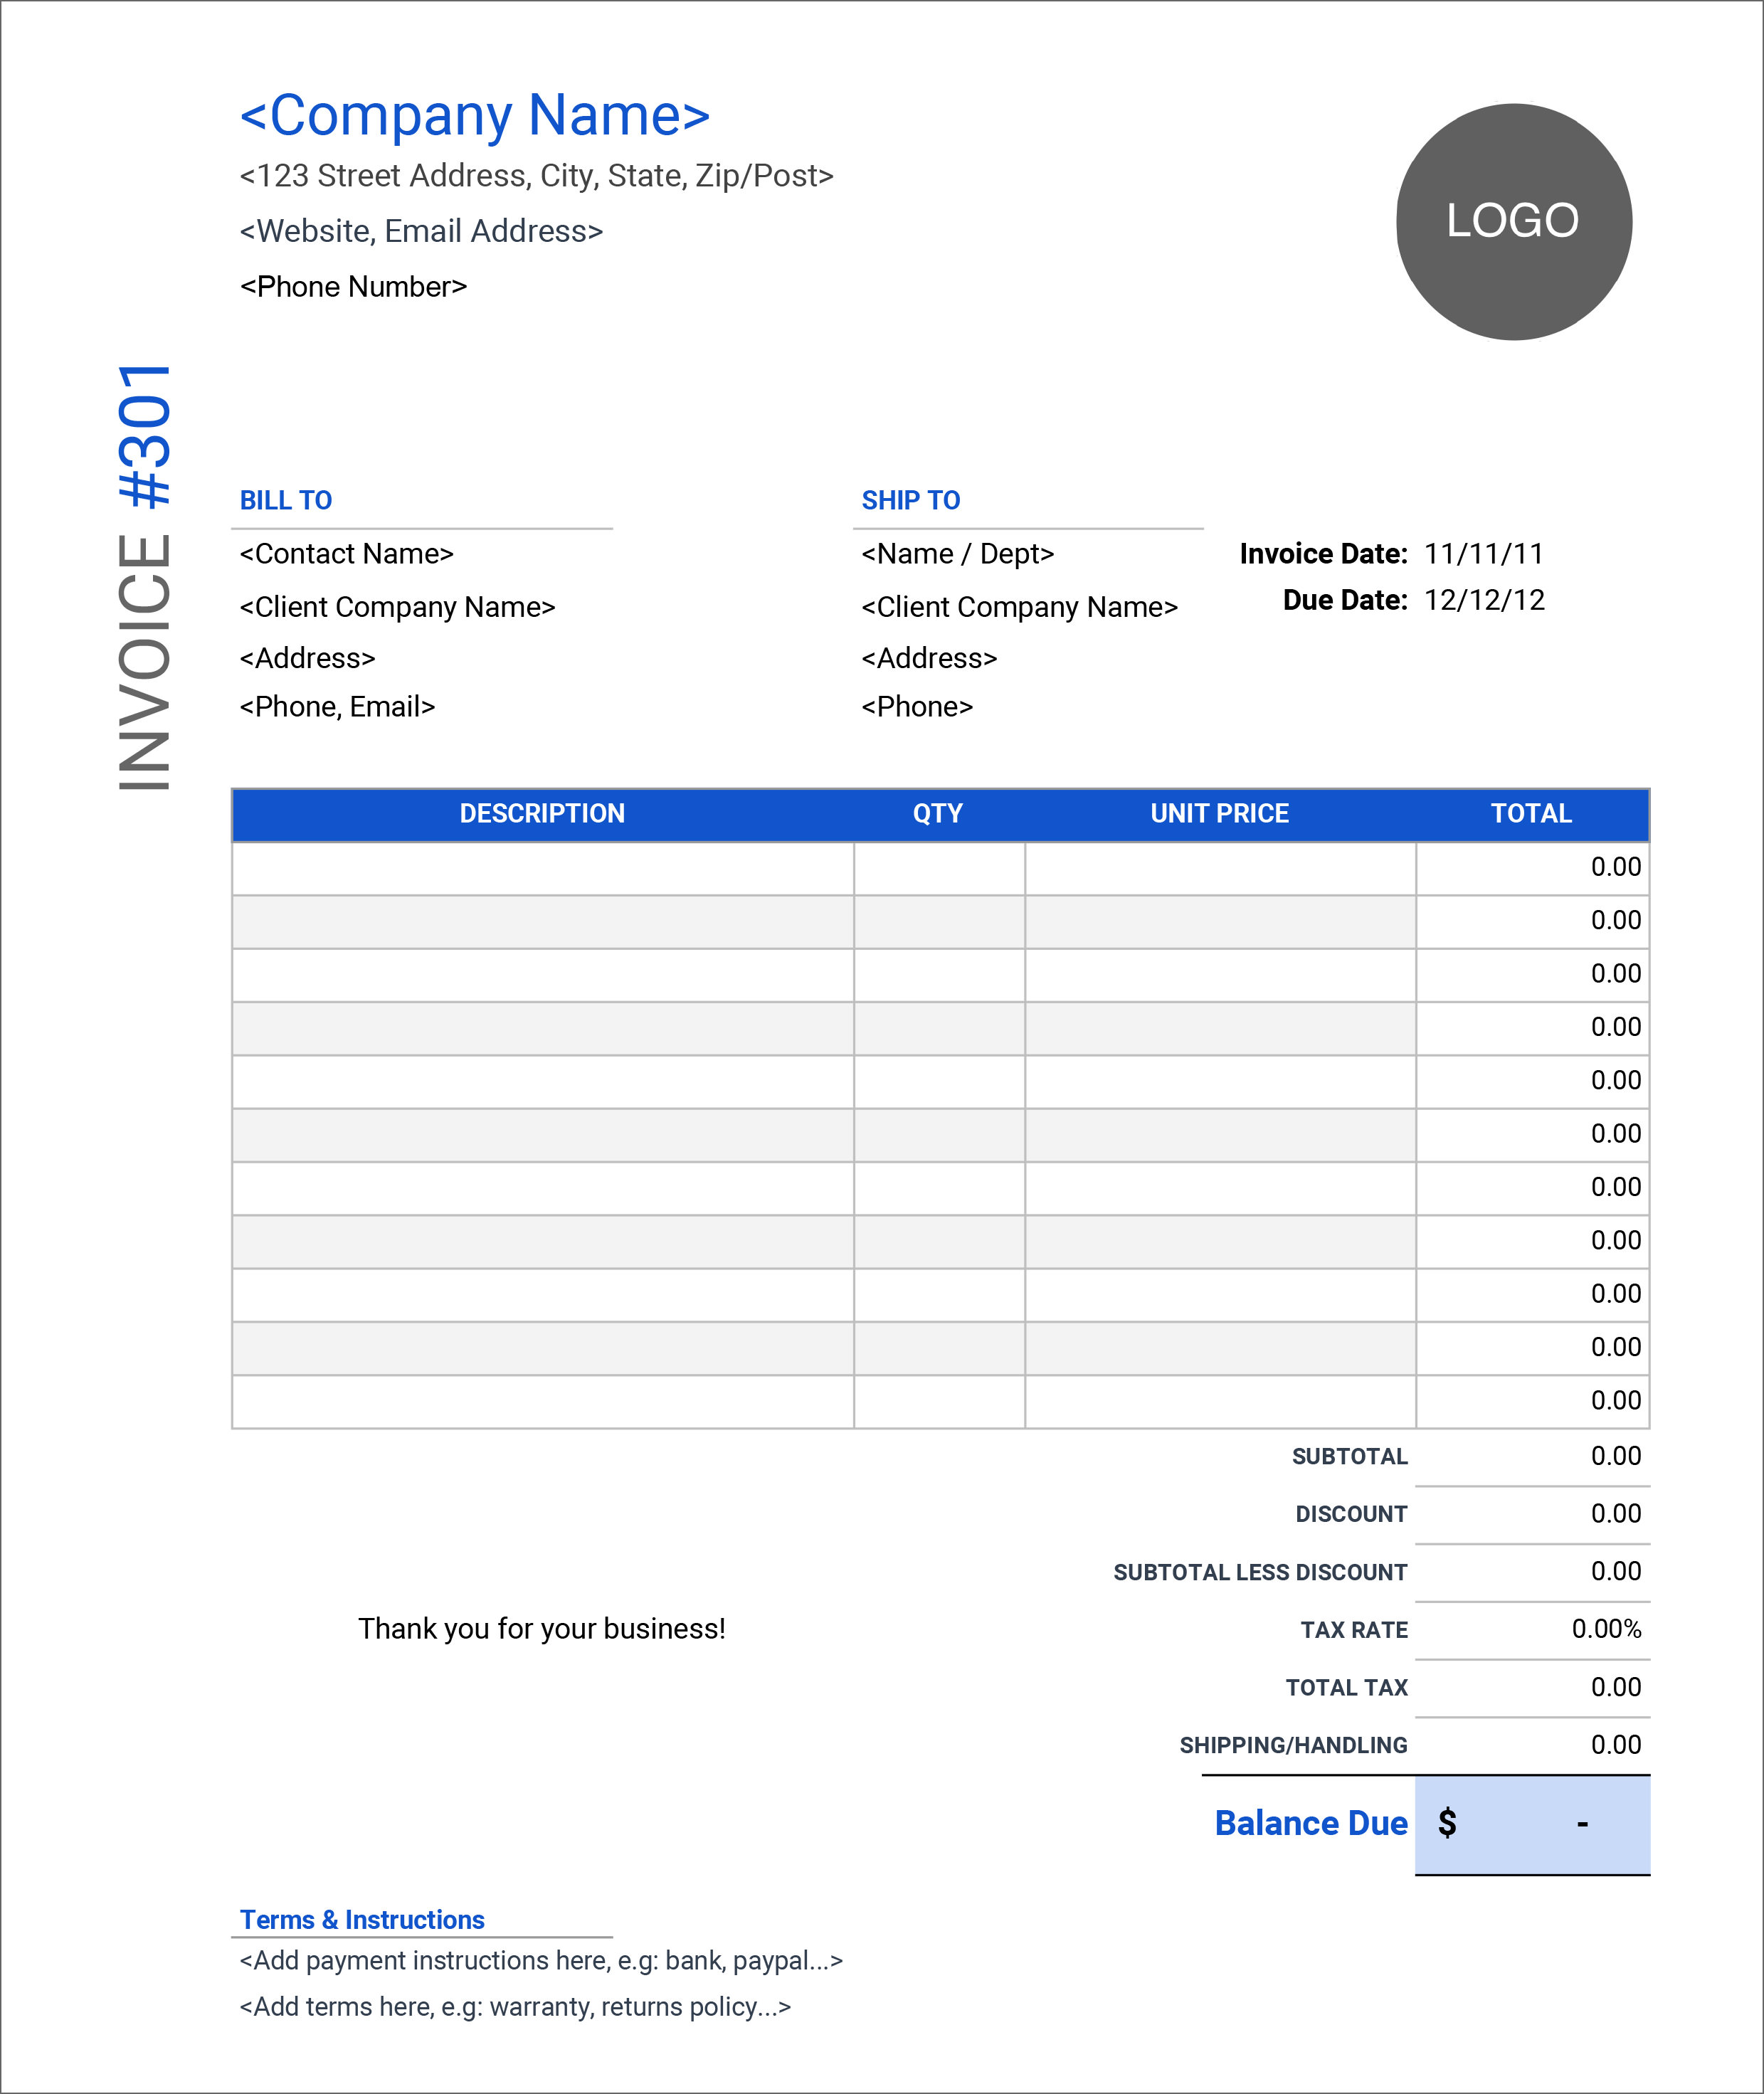 32-free-invoice-templates-in-microsoft-excel-and-docx-formats